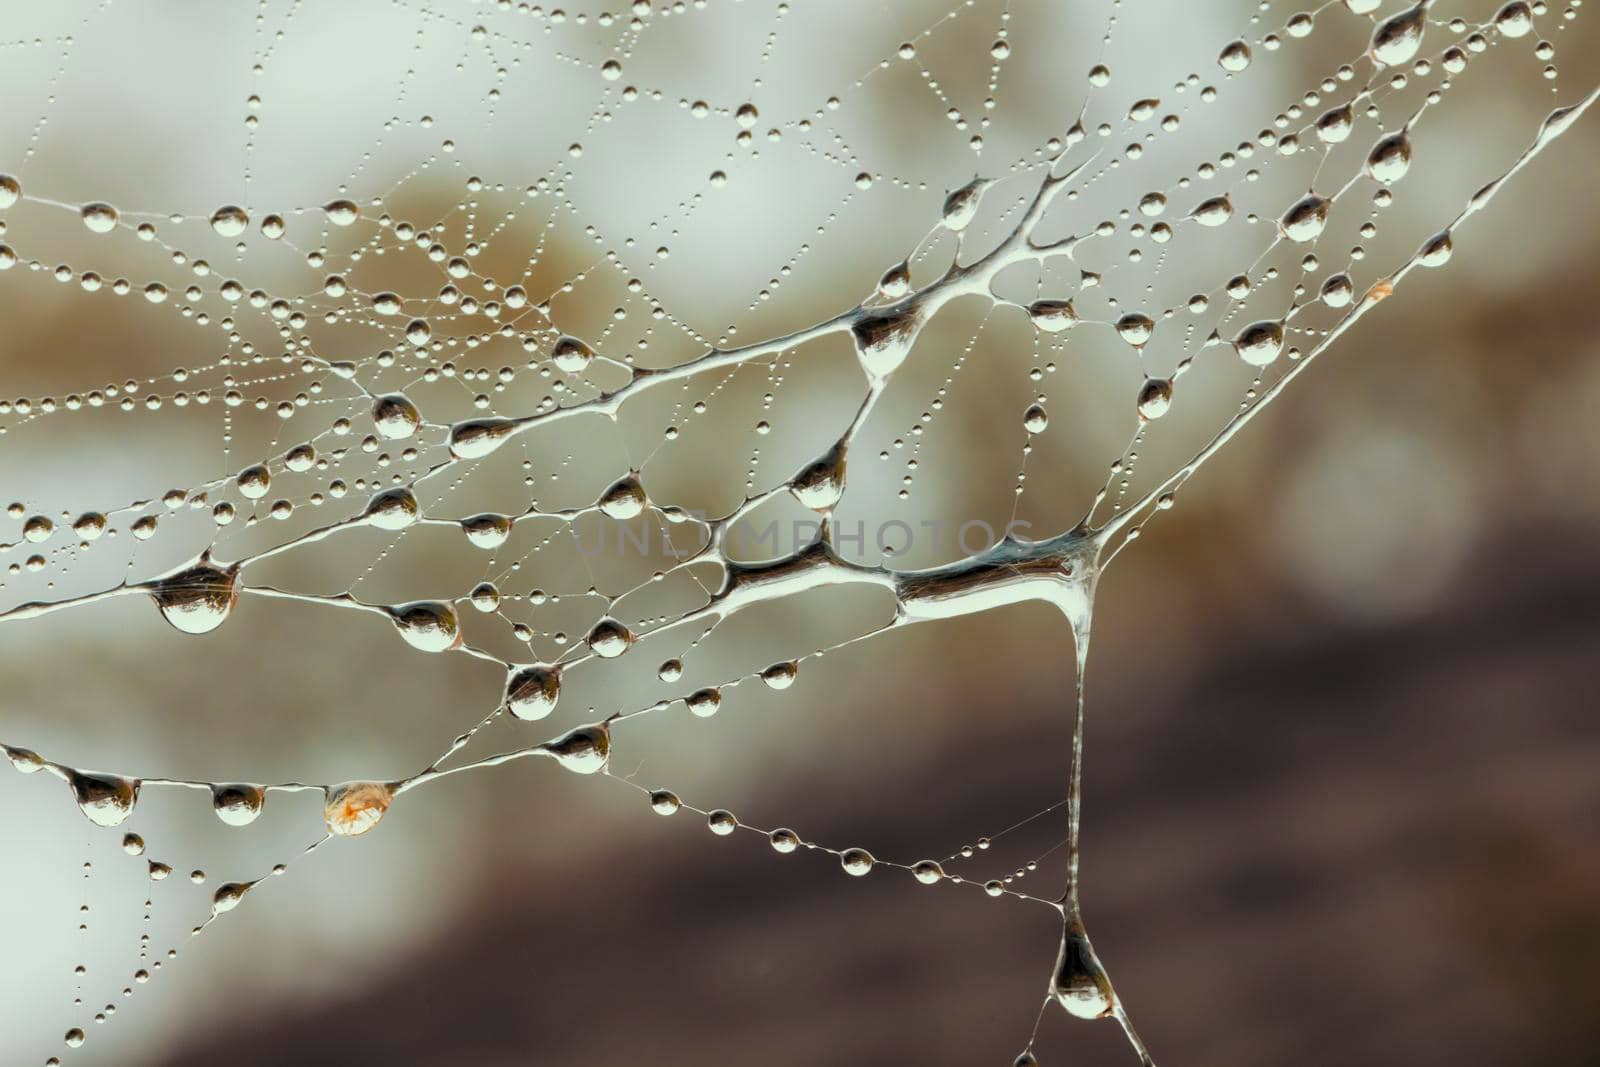 A large spider web with water drops by WittkePhotos